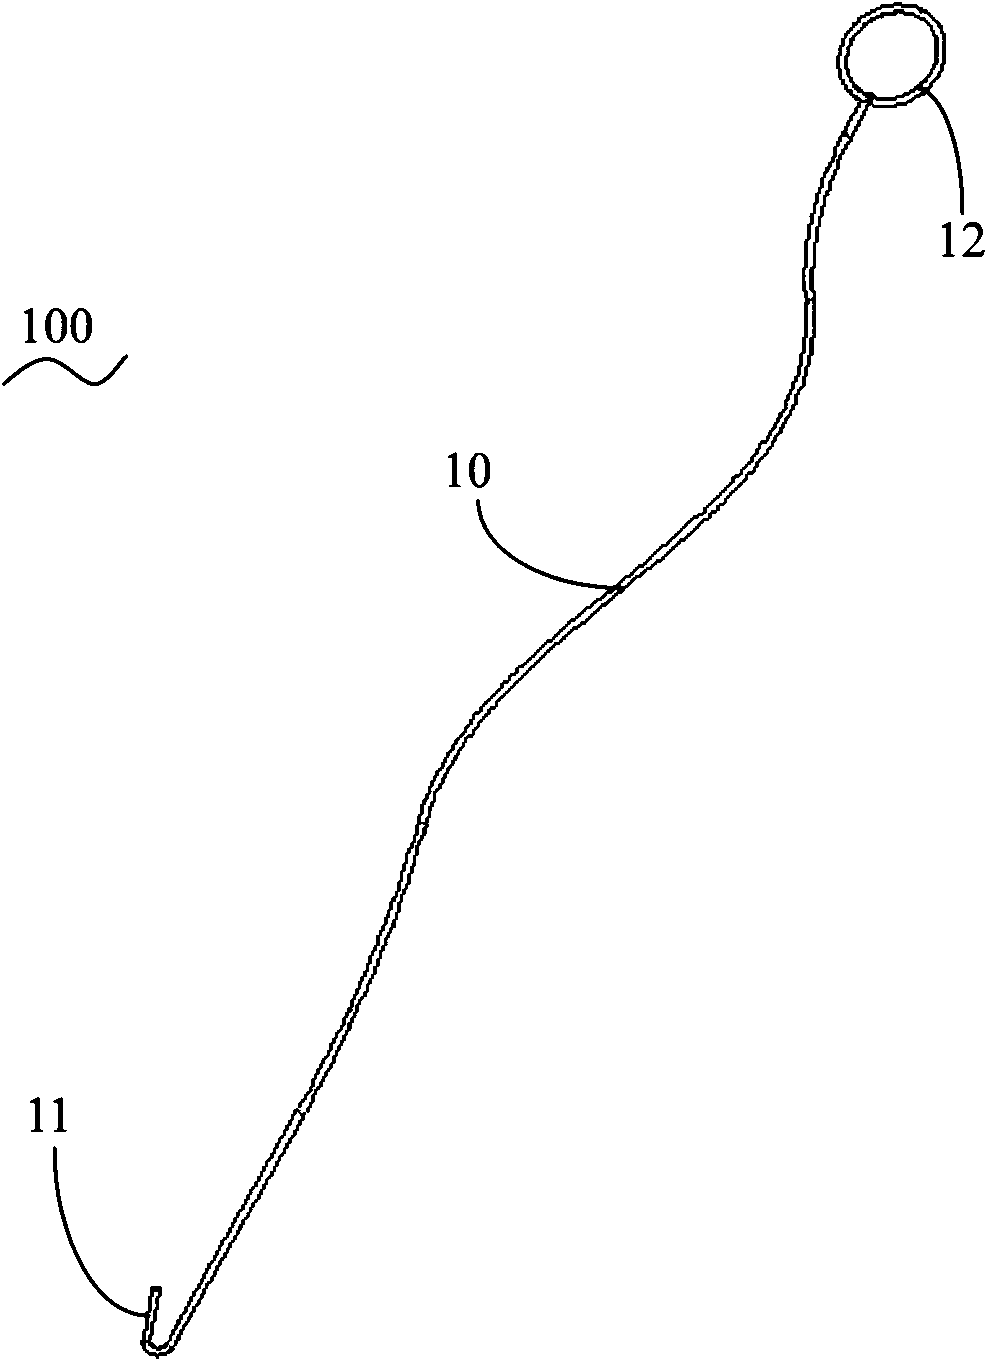 Electrode wire threading device